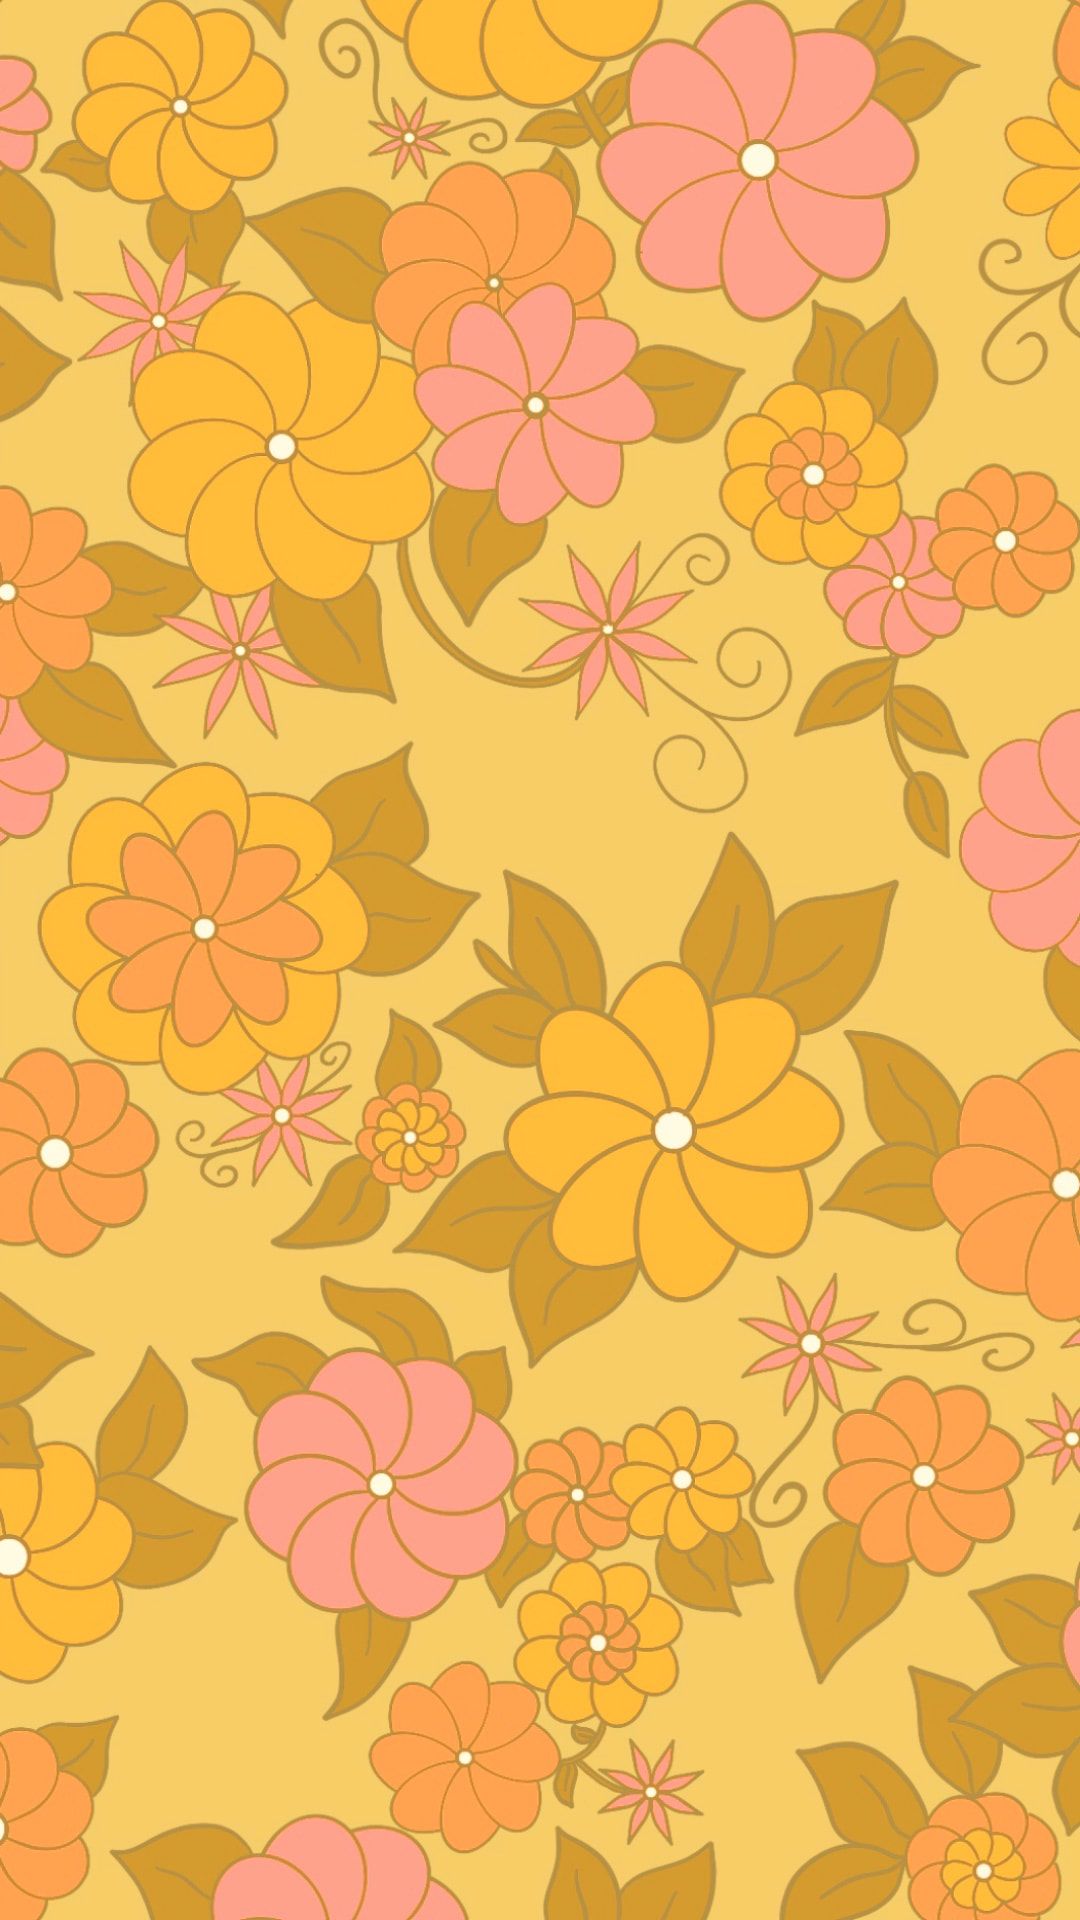 Yellow and pink floral wallpaper for your iPhone 8 from Everpix - 70s